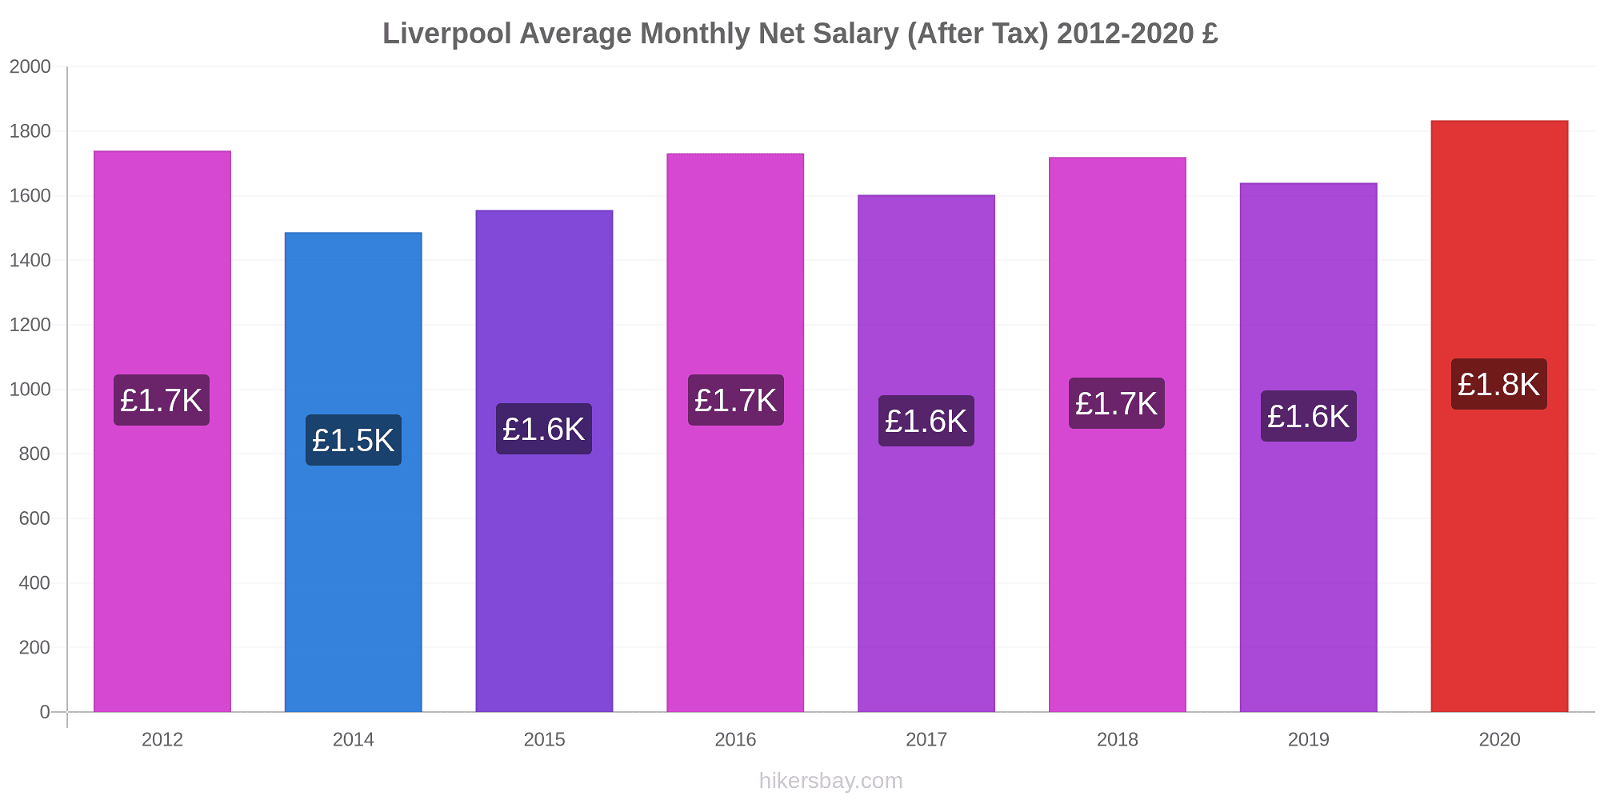 Liverpool price changes Average Monthly Net Salary (After Tax) hikersbay.com